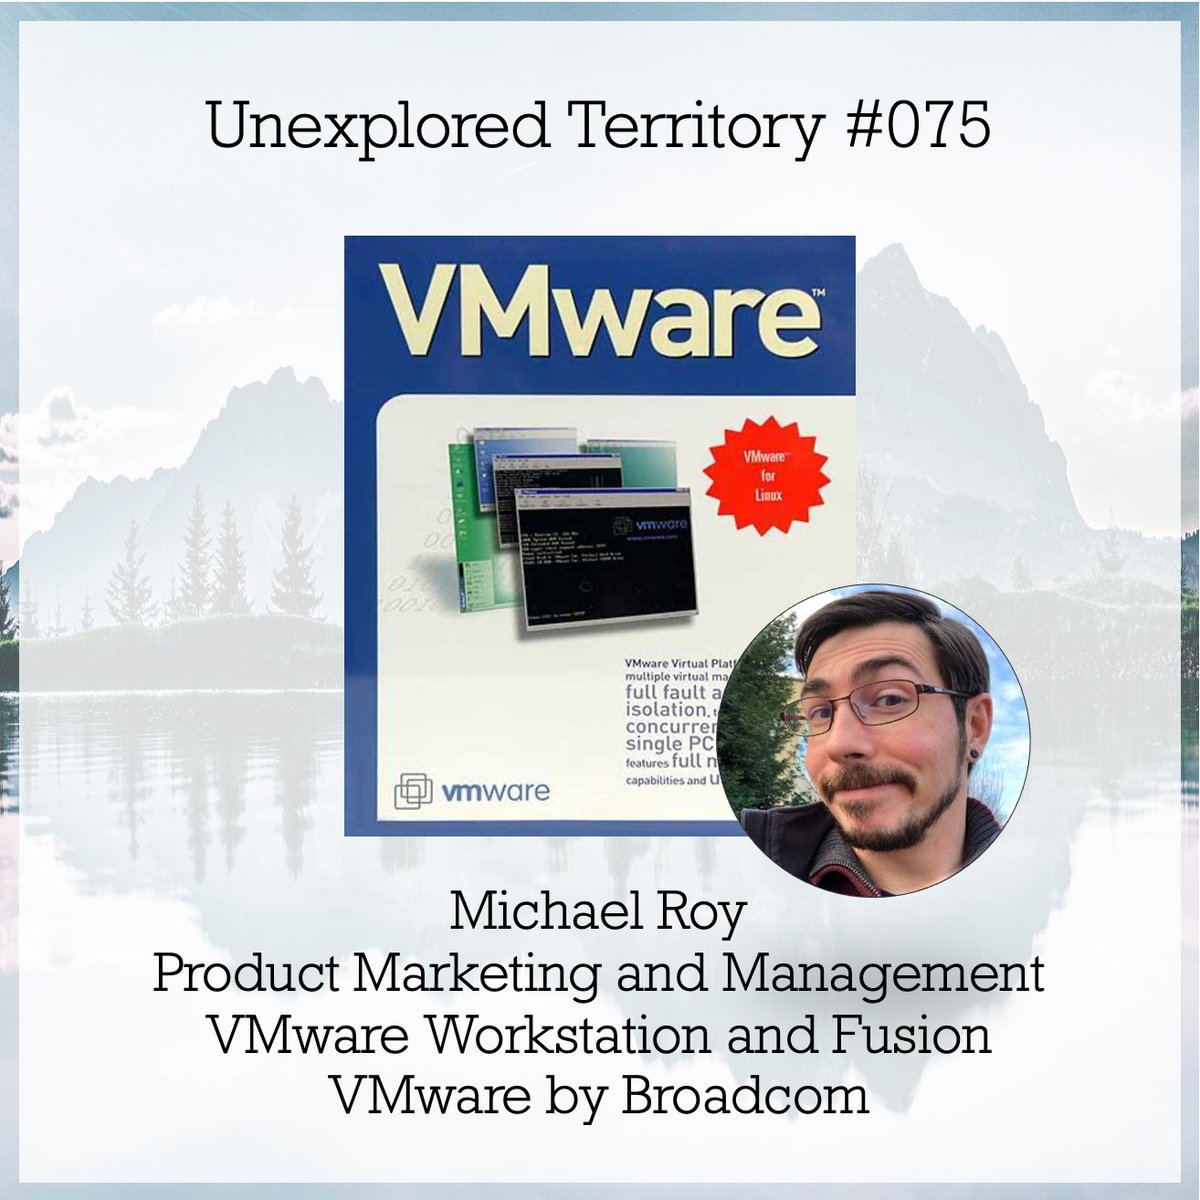 SAY WHAT? VMware Workstation and Fusion free for personal use? Hear all about it on this special episode of the podcast! unexploredterritory.tech/074-newsflash-… (or go to Spotify / Apple etc and dig it up!)